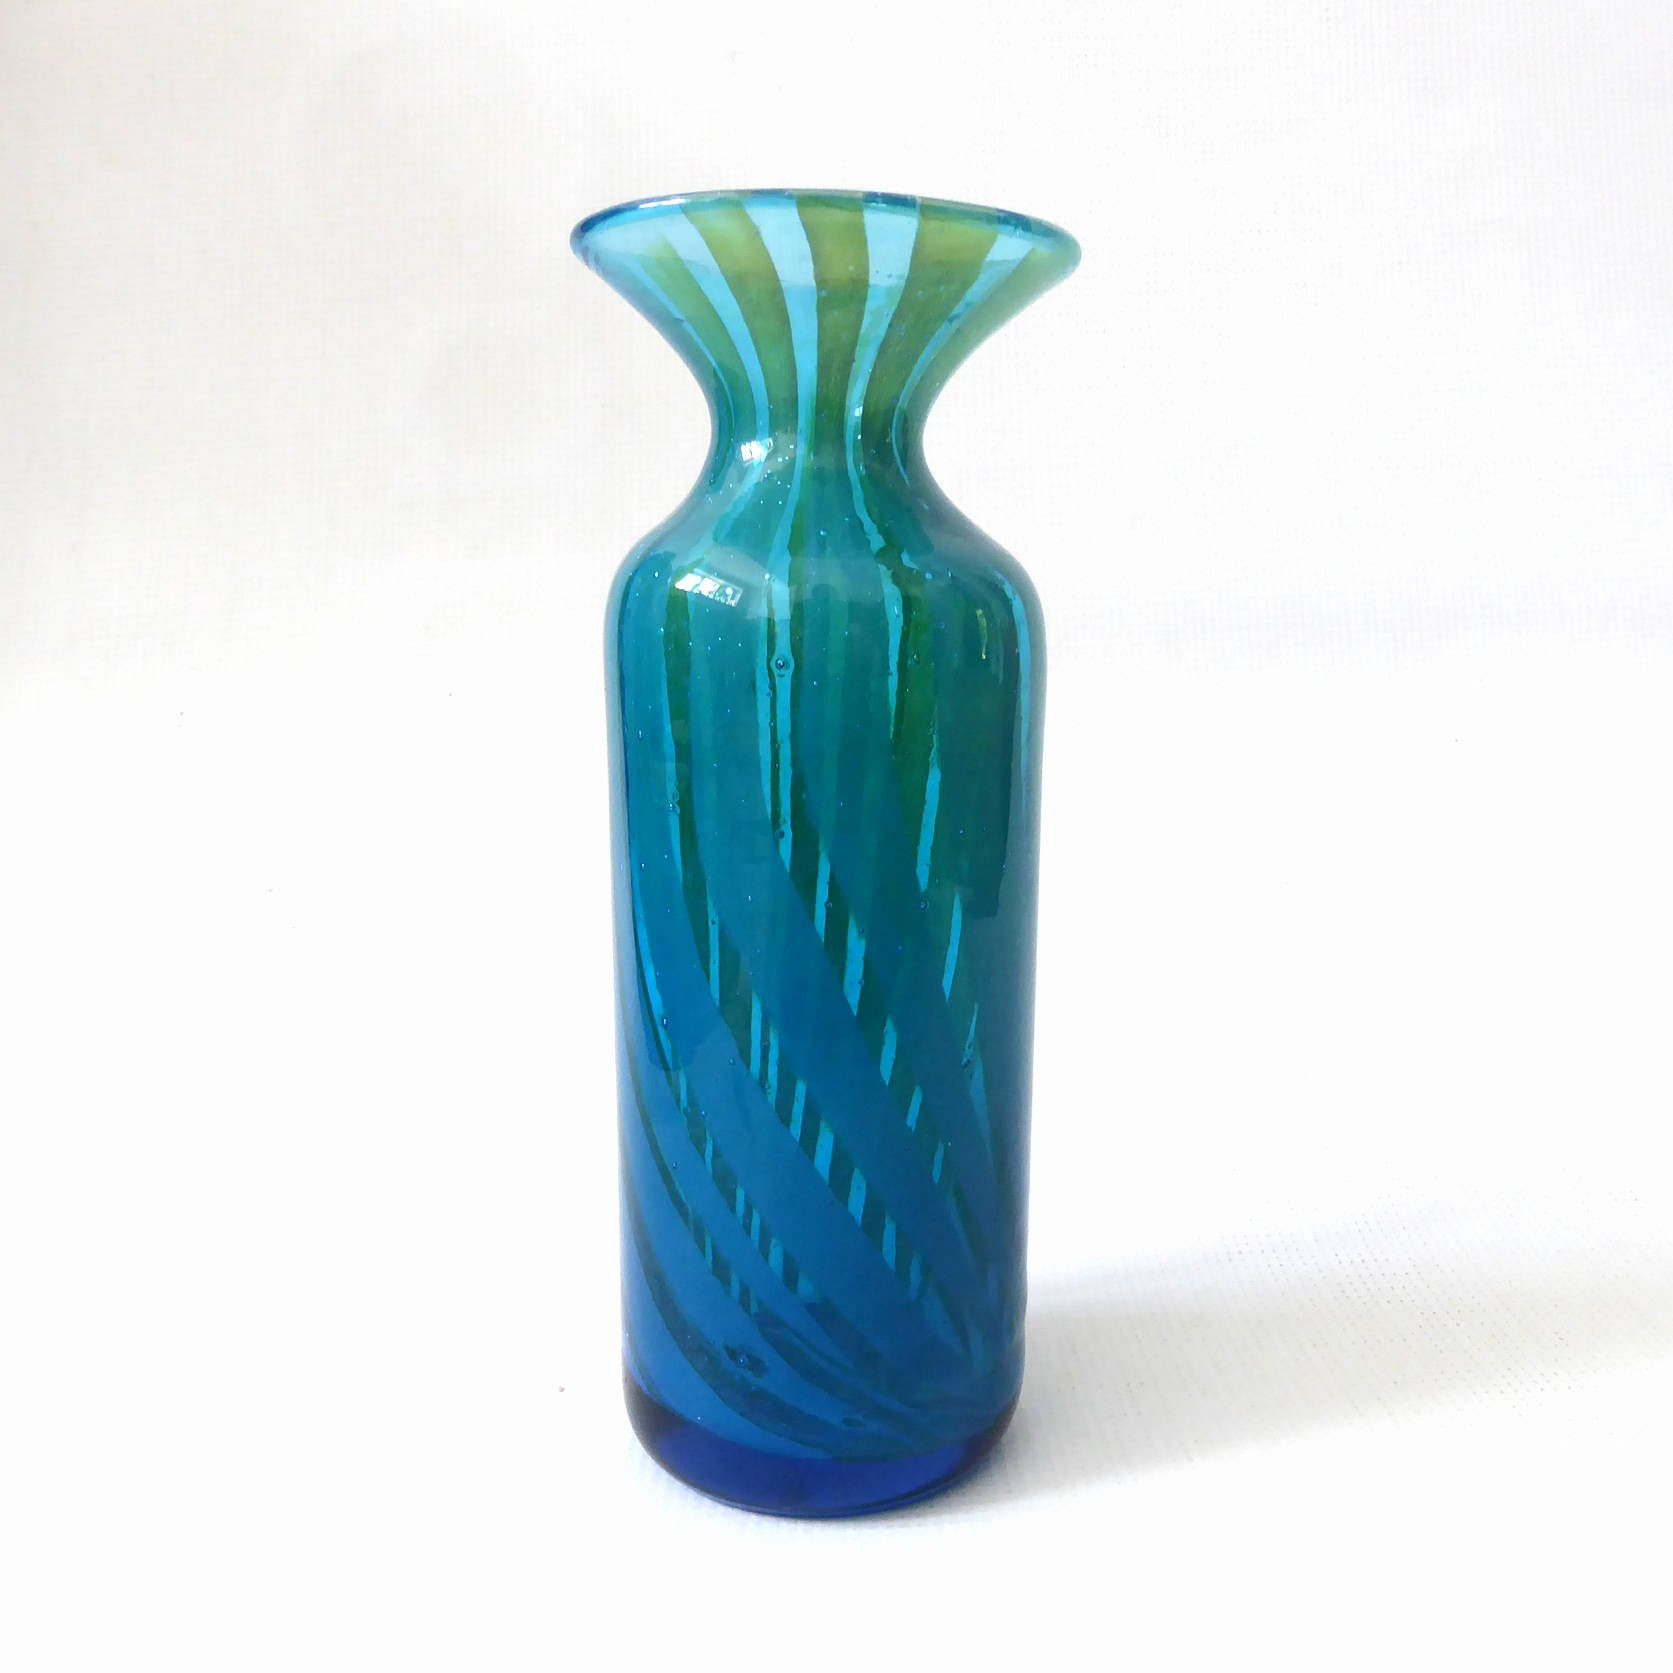 17 Ideal Antique Colored Glass Vases 2024 free download antique colored glass vases of 35 antique green glass vases the weekly world in antique glass vases identify vase and cellar image avorcor